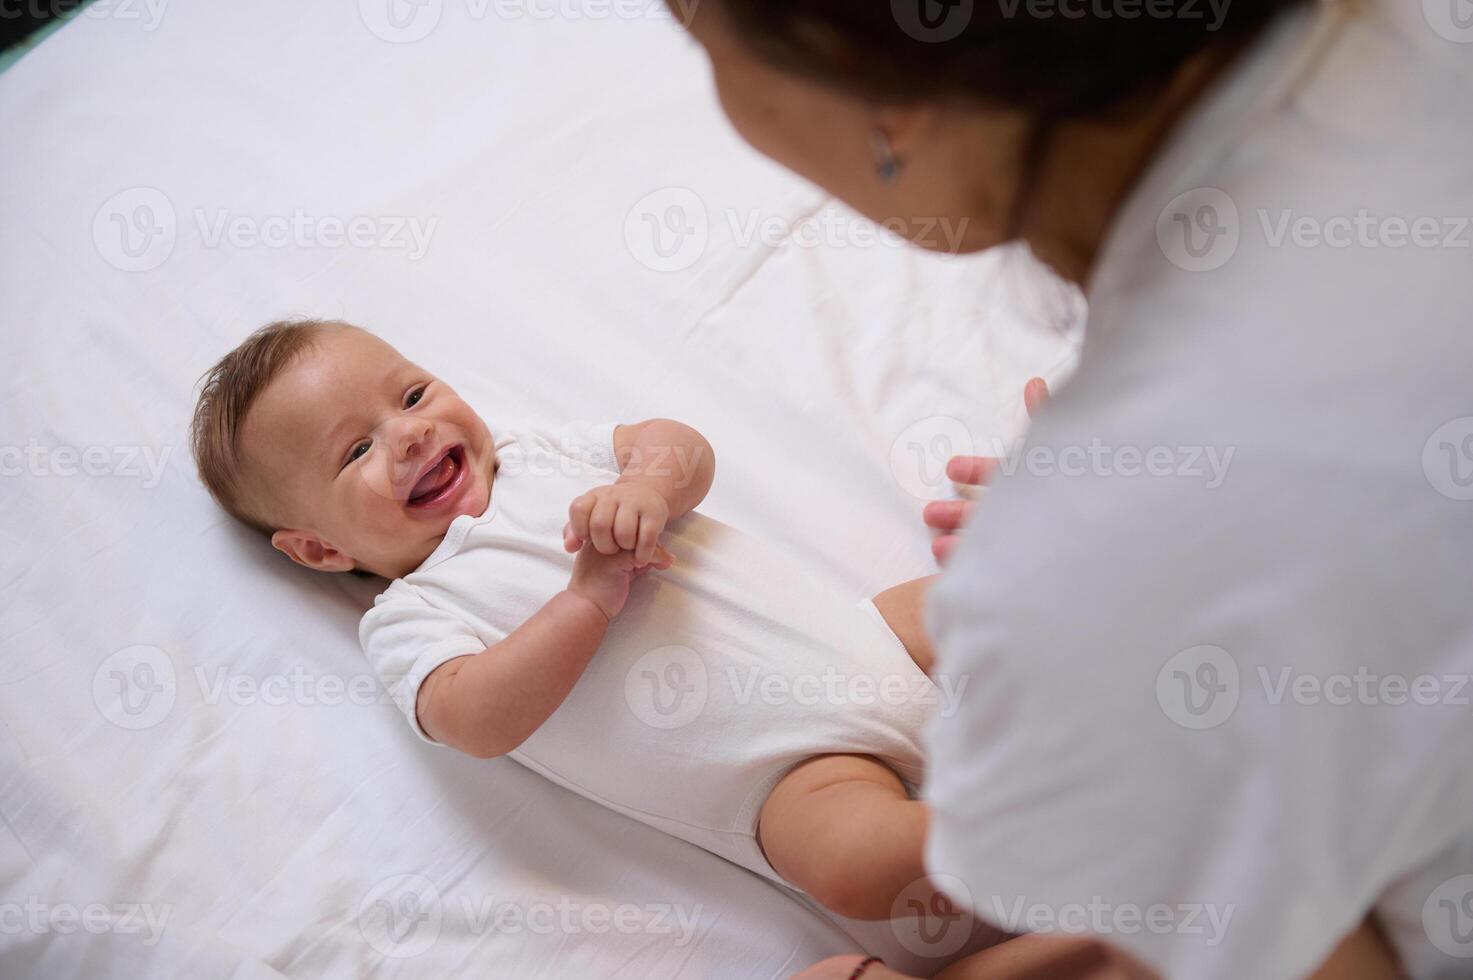 Playful baby boy 4 month old holding hands together, laughing, smiling, catching emotions of his loving caring mother photo